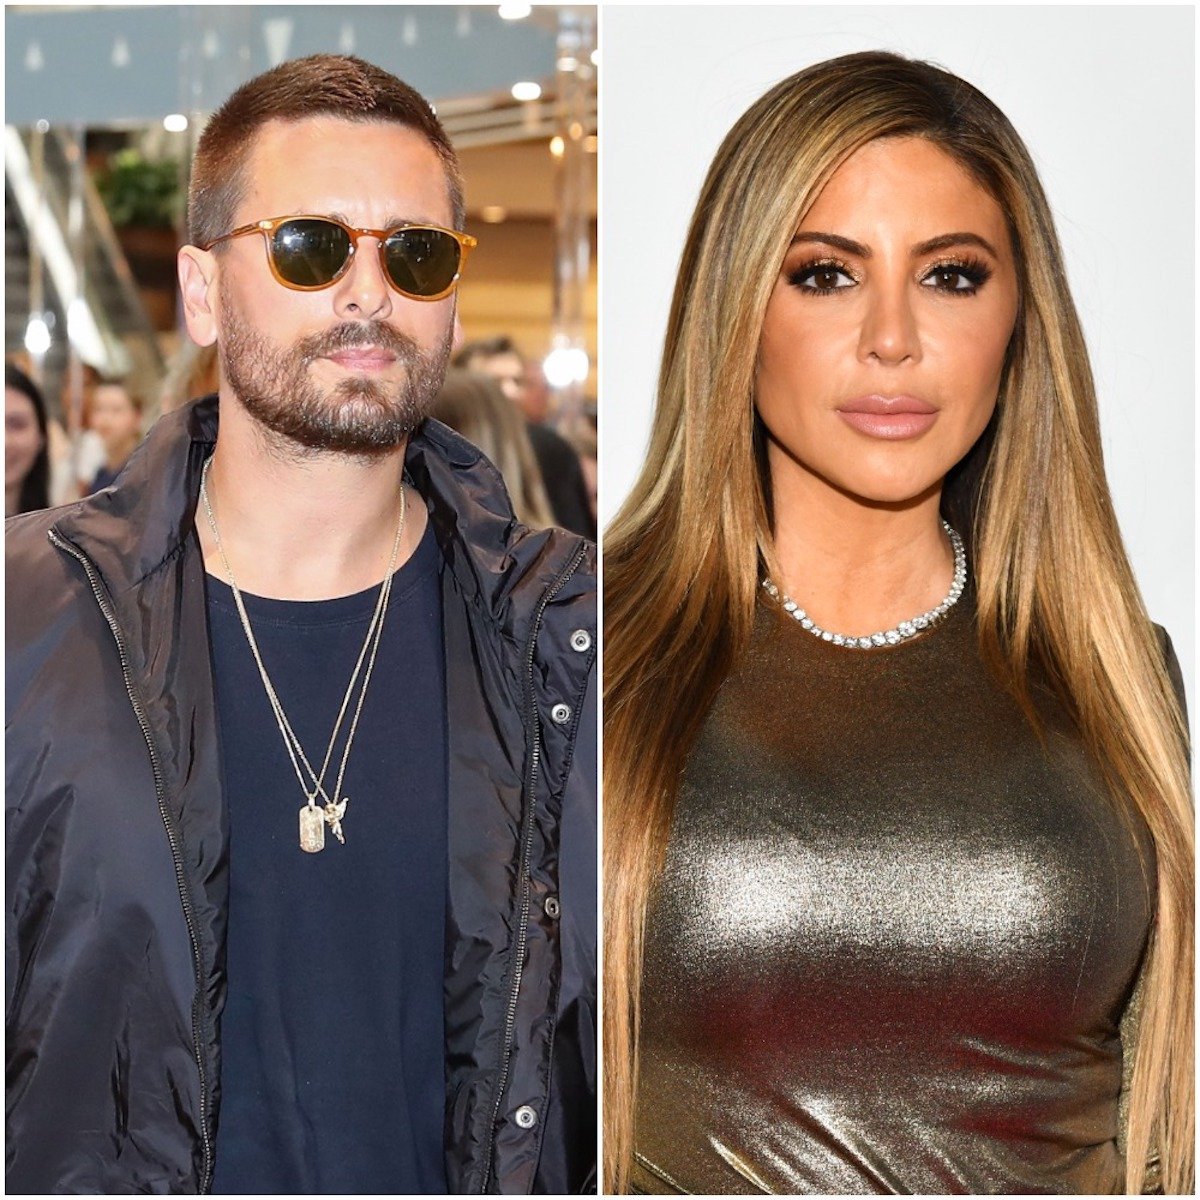 Scott Disick and Larsa Pippen at separate events